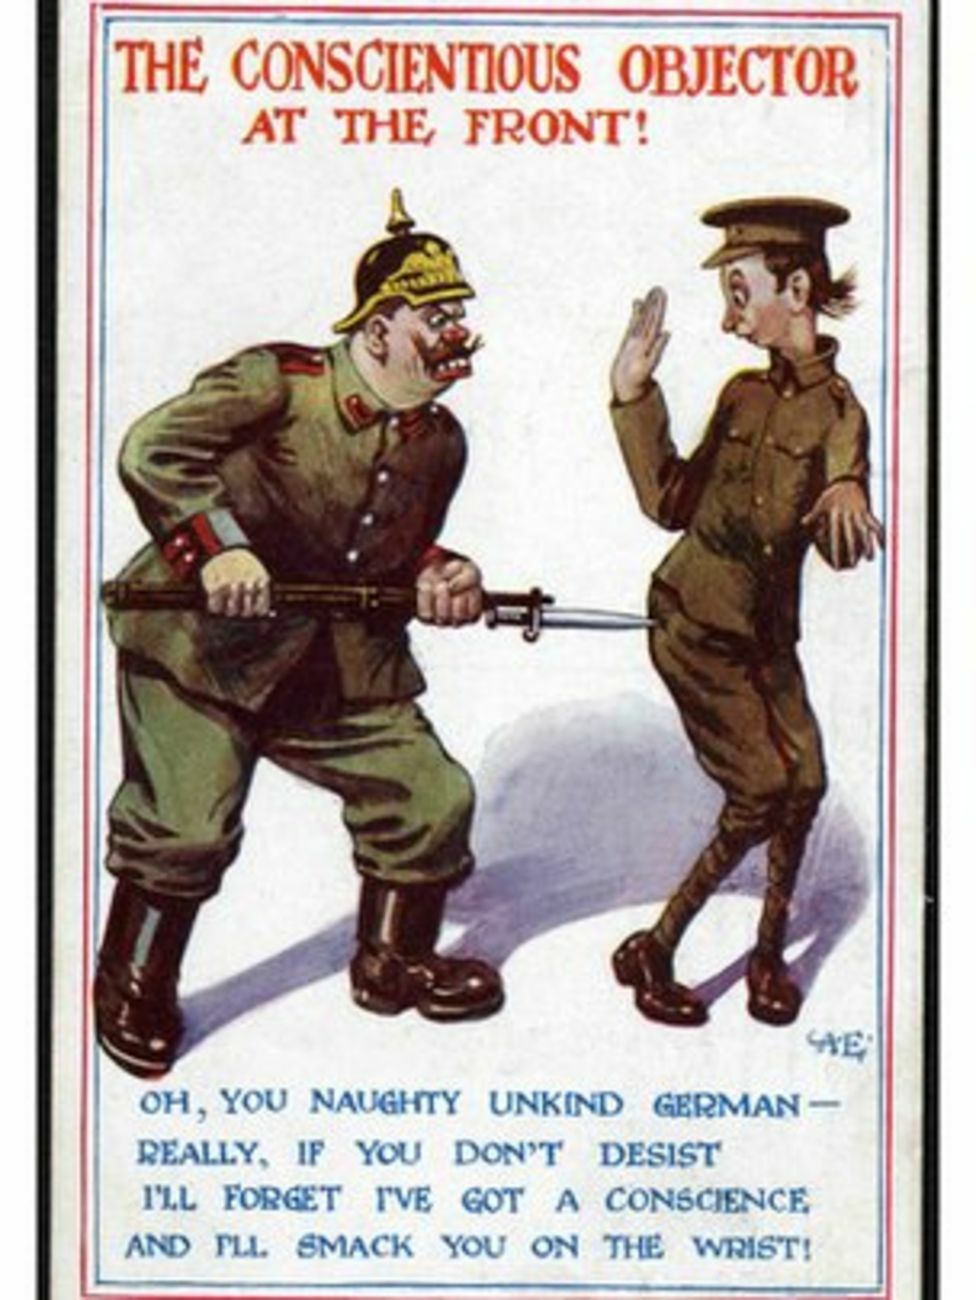 CO cartoon - Stereotypical unmanly soldier reacts with  horror to massive German soldier and threatens to smack him on the wrist